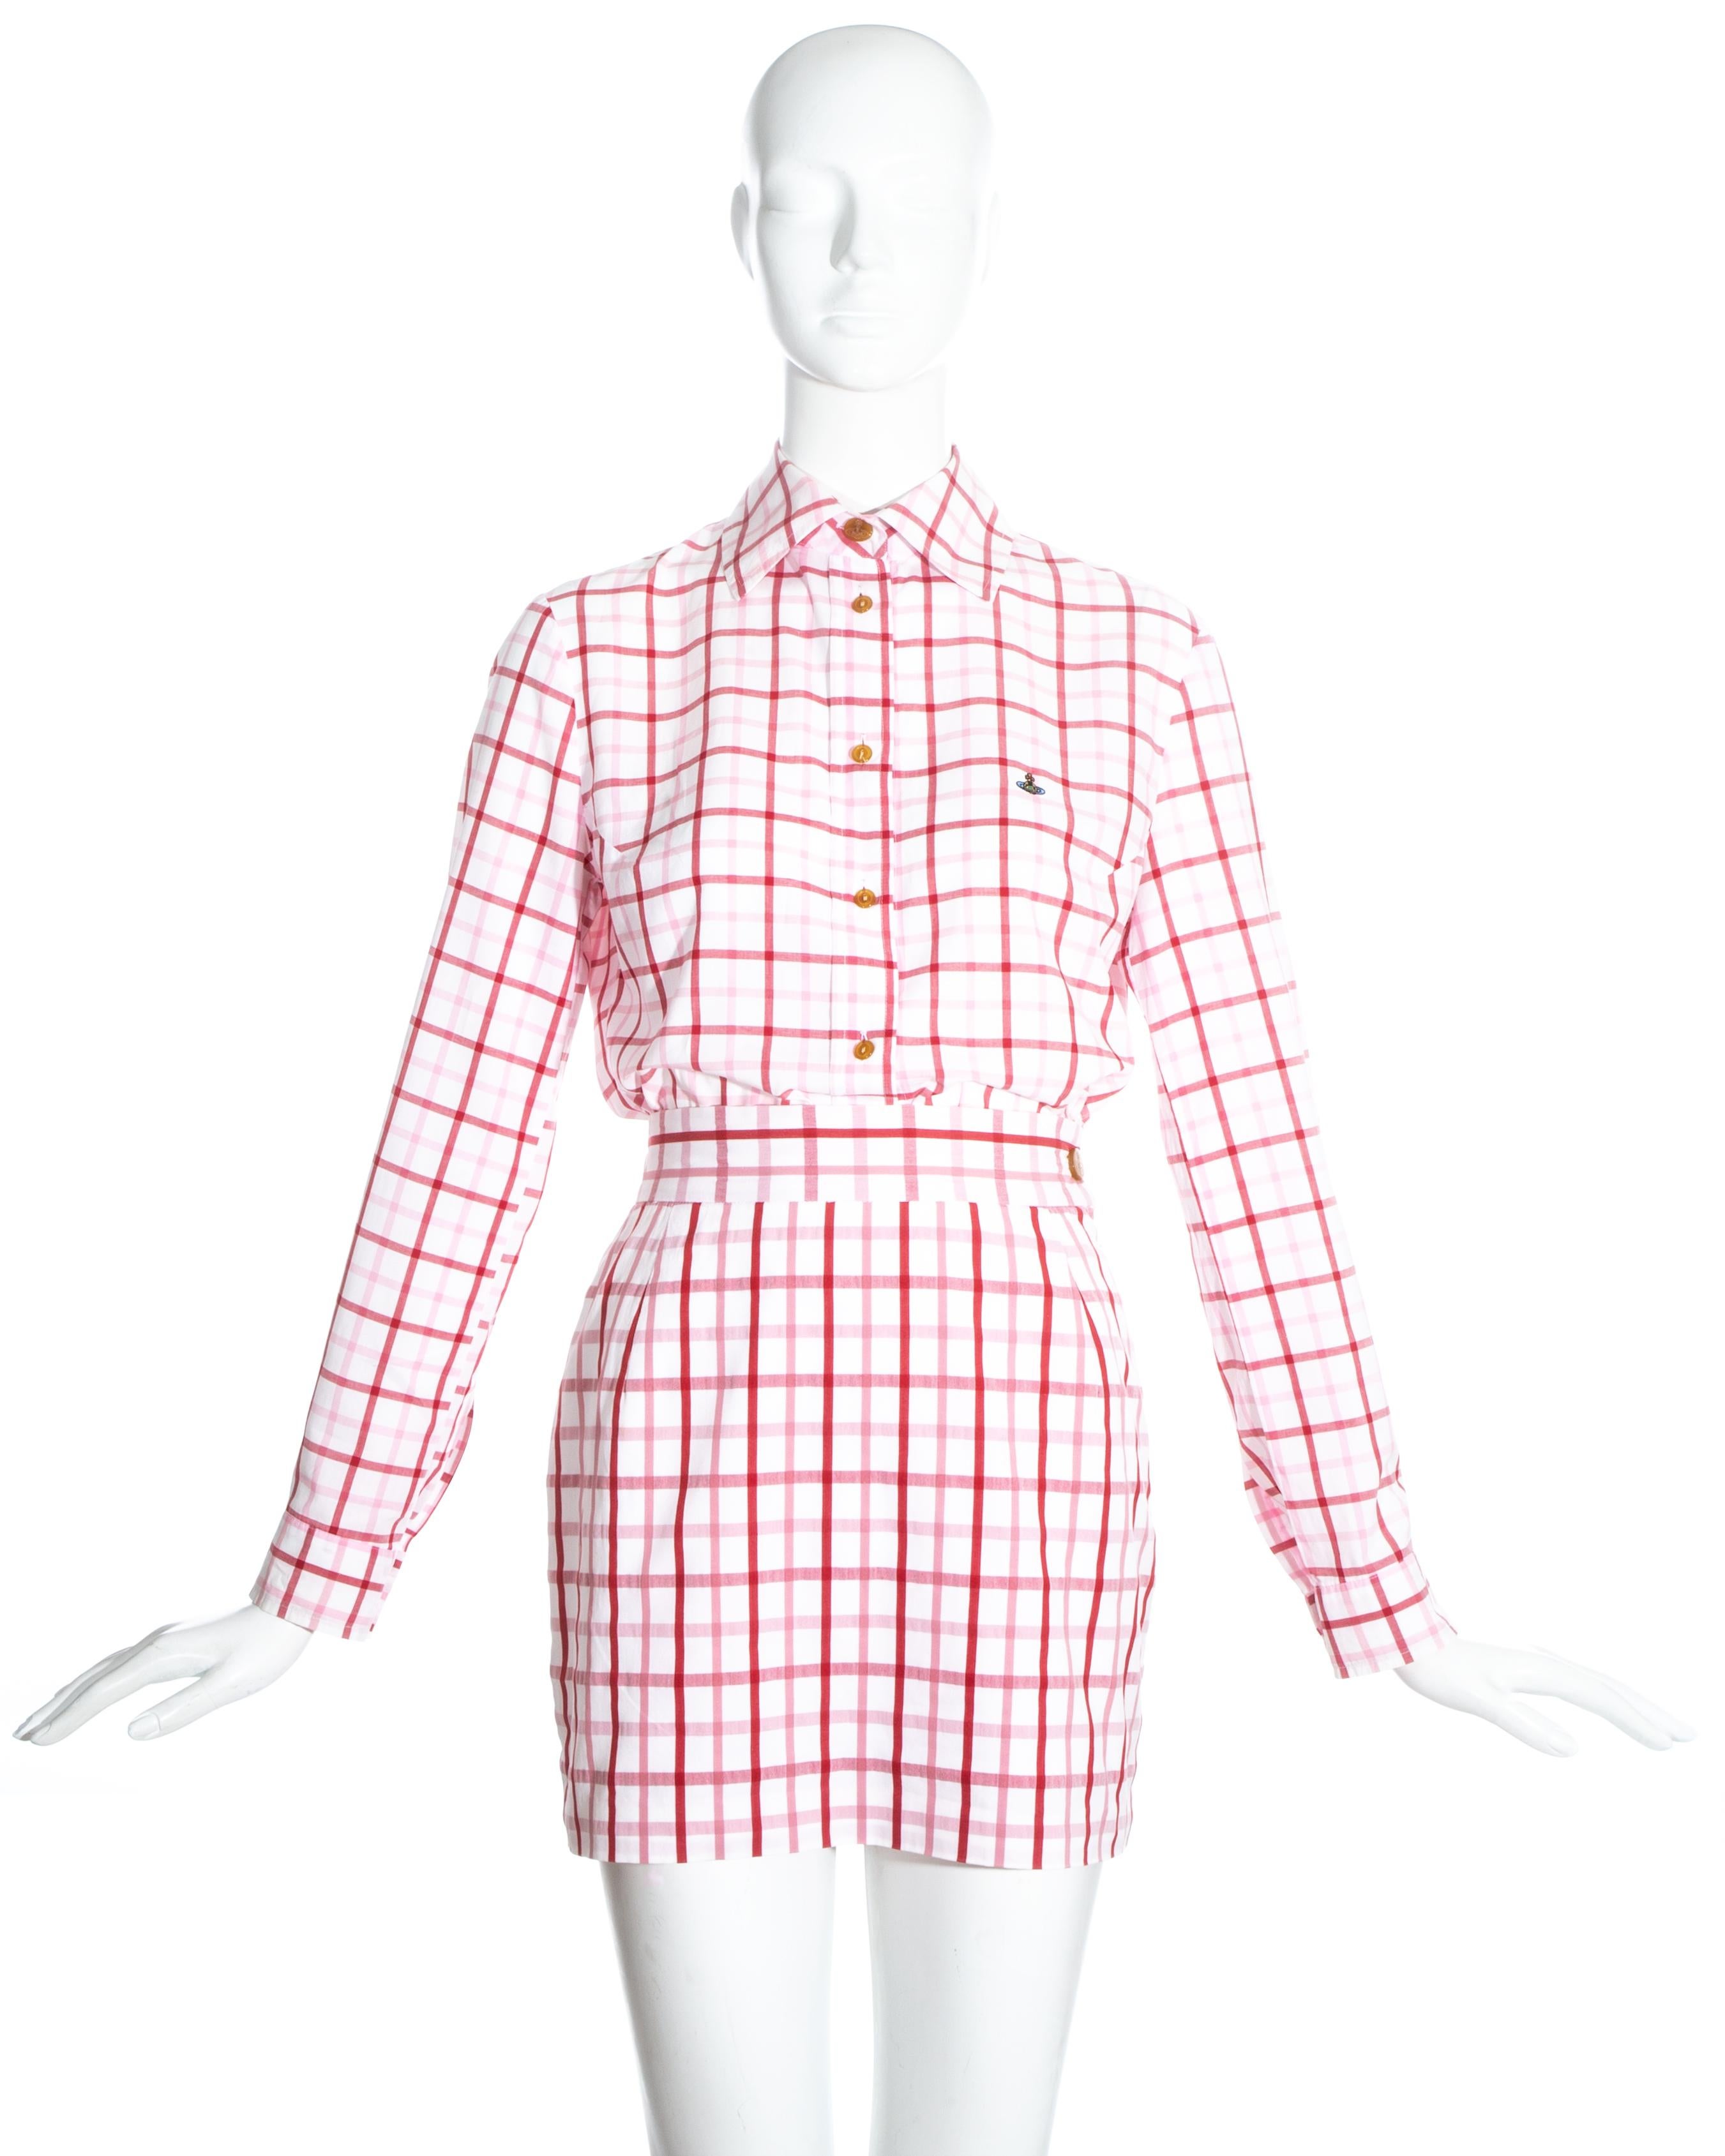 Vivienne Westwood pink and red checked cotton skirt suit comprising: button up shirt with embroidered orb, and high waisted mini skirt.

Spring-Summer 1994